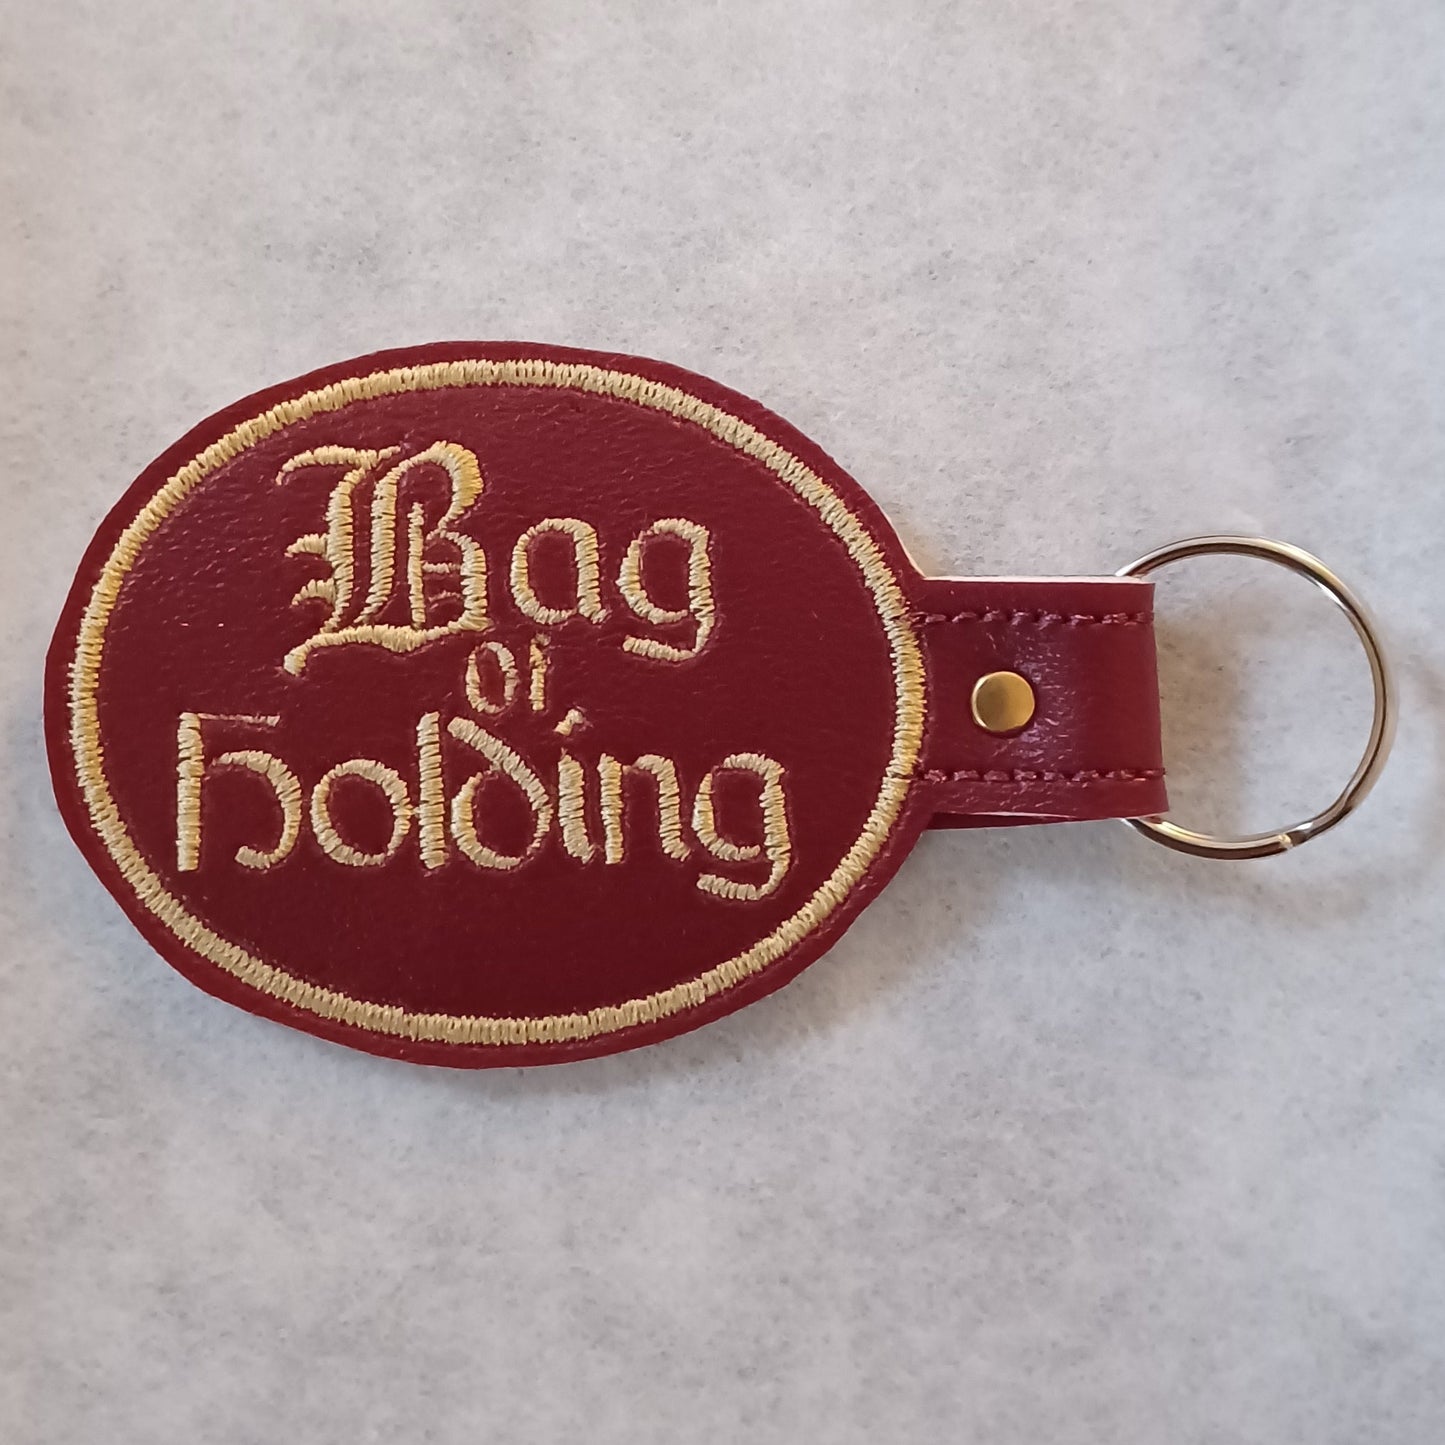 Bag of Holding Embroidered Vinyl Key Ring